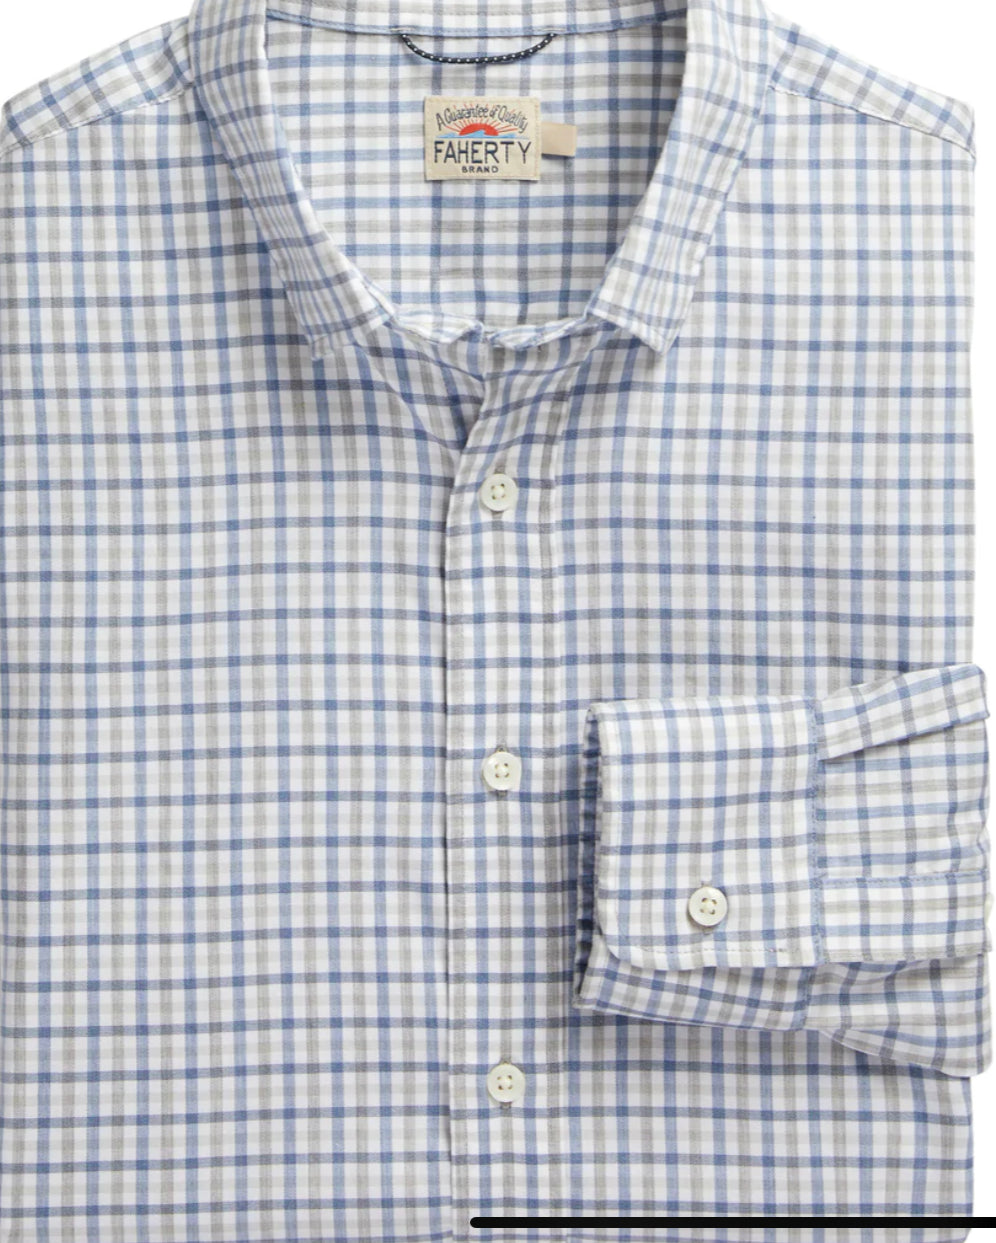 Faherty Movement Spruce Lake Gingham